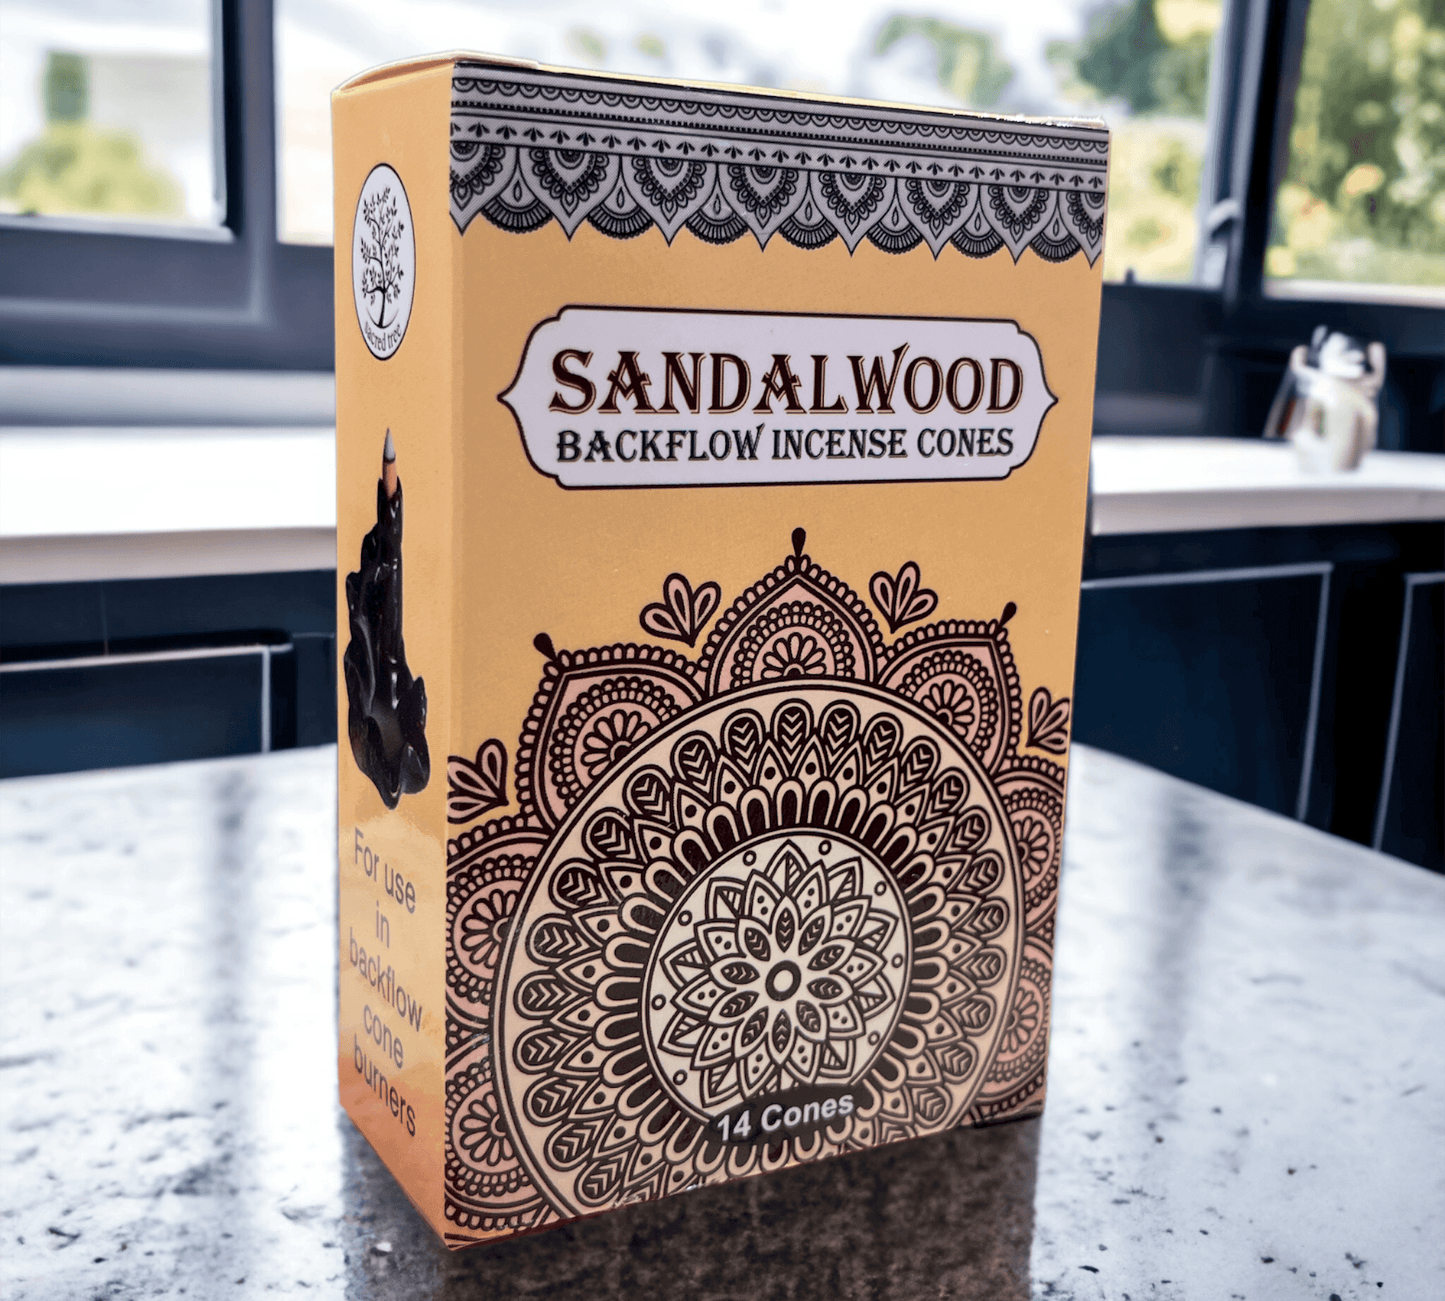 Elevate your home with the natural fragrances of this premium sandalwood incense. Use each cone for up to 30 minutes of calming, earthy scents that provide a comforting and serene atmosphere. Enjoy a safe and clean burning experience with no toxic fumes.